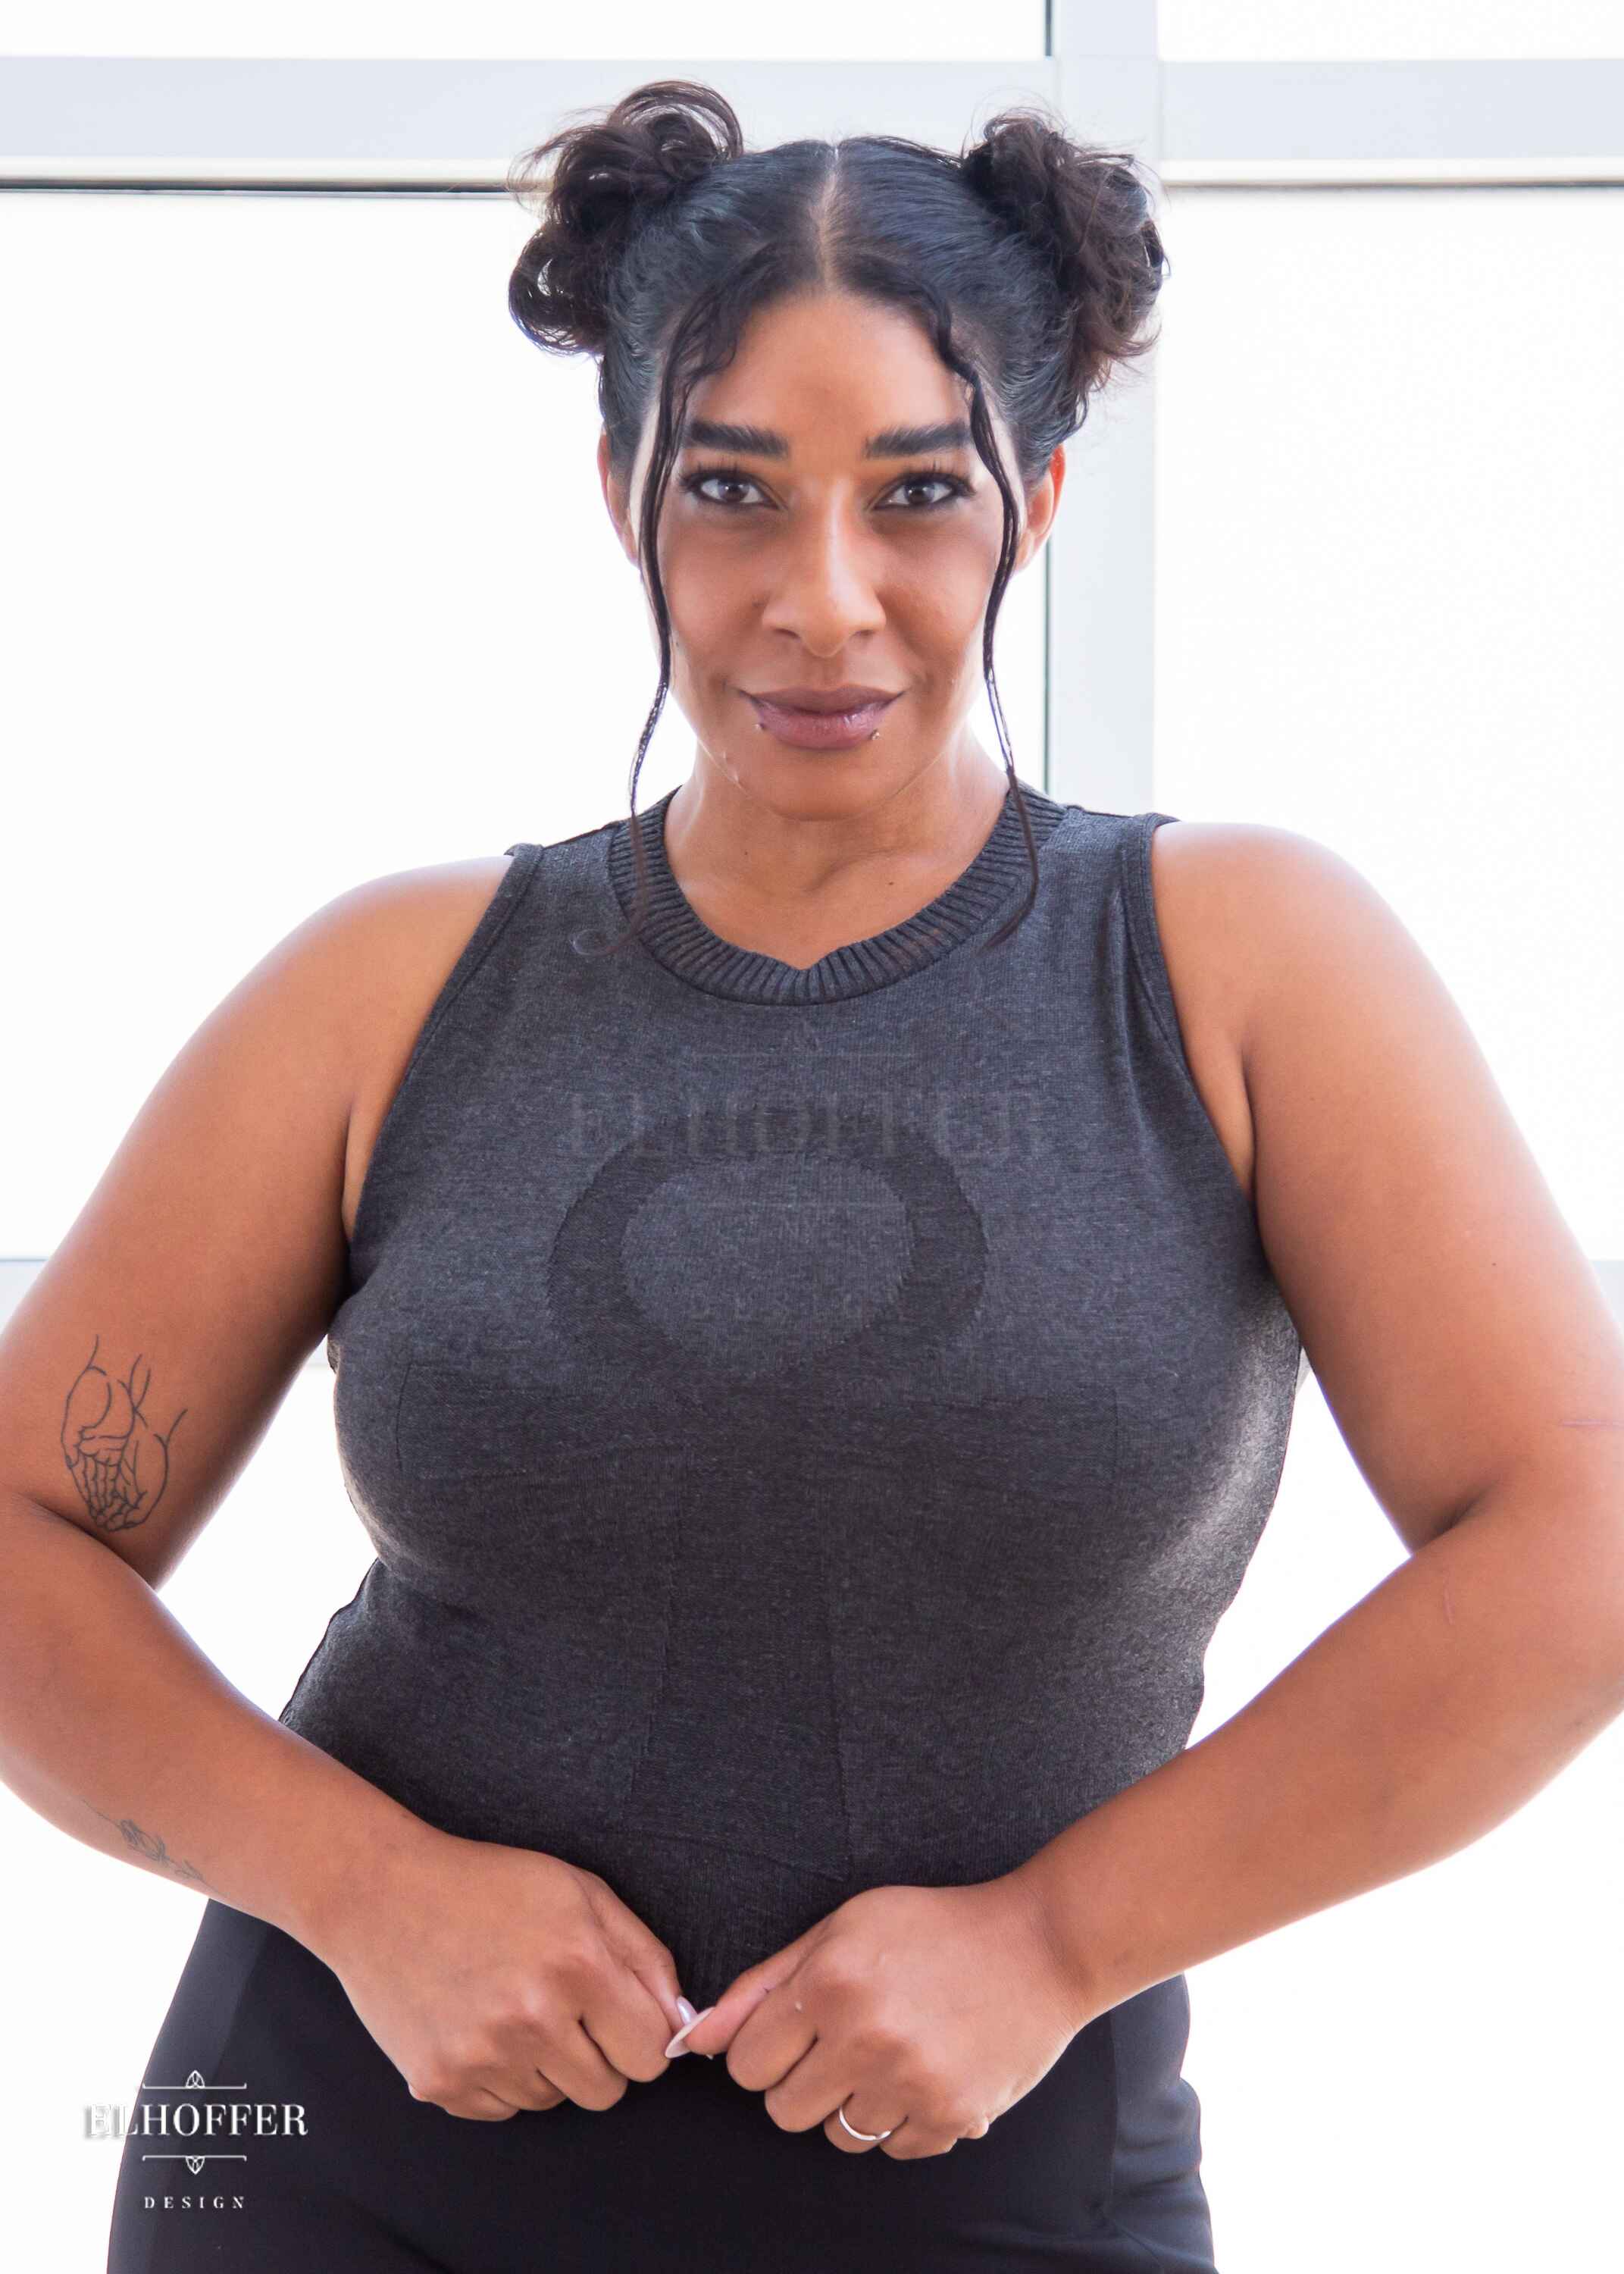 Janae, a light brown skinned L model with dark hair in space buns, is smiling while wearing a dark grey sleeveless knit crop top with a large subtle ankh design on the front.